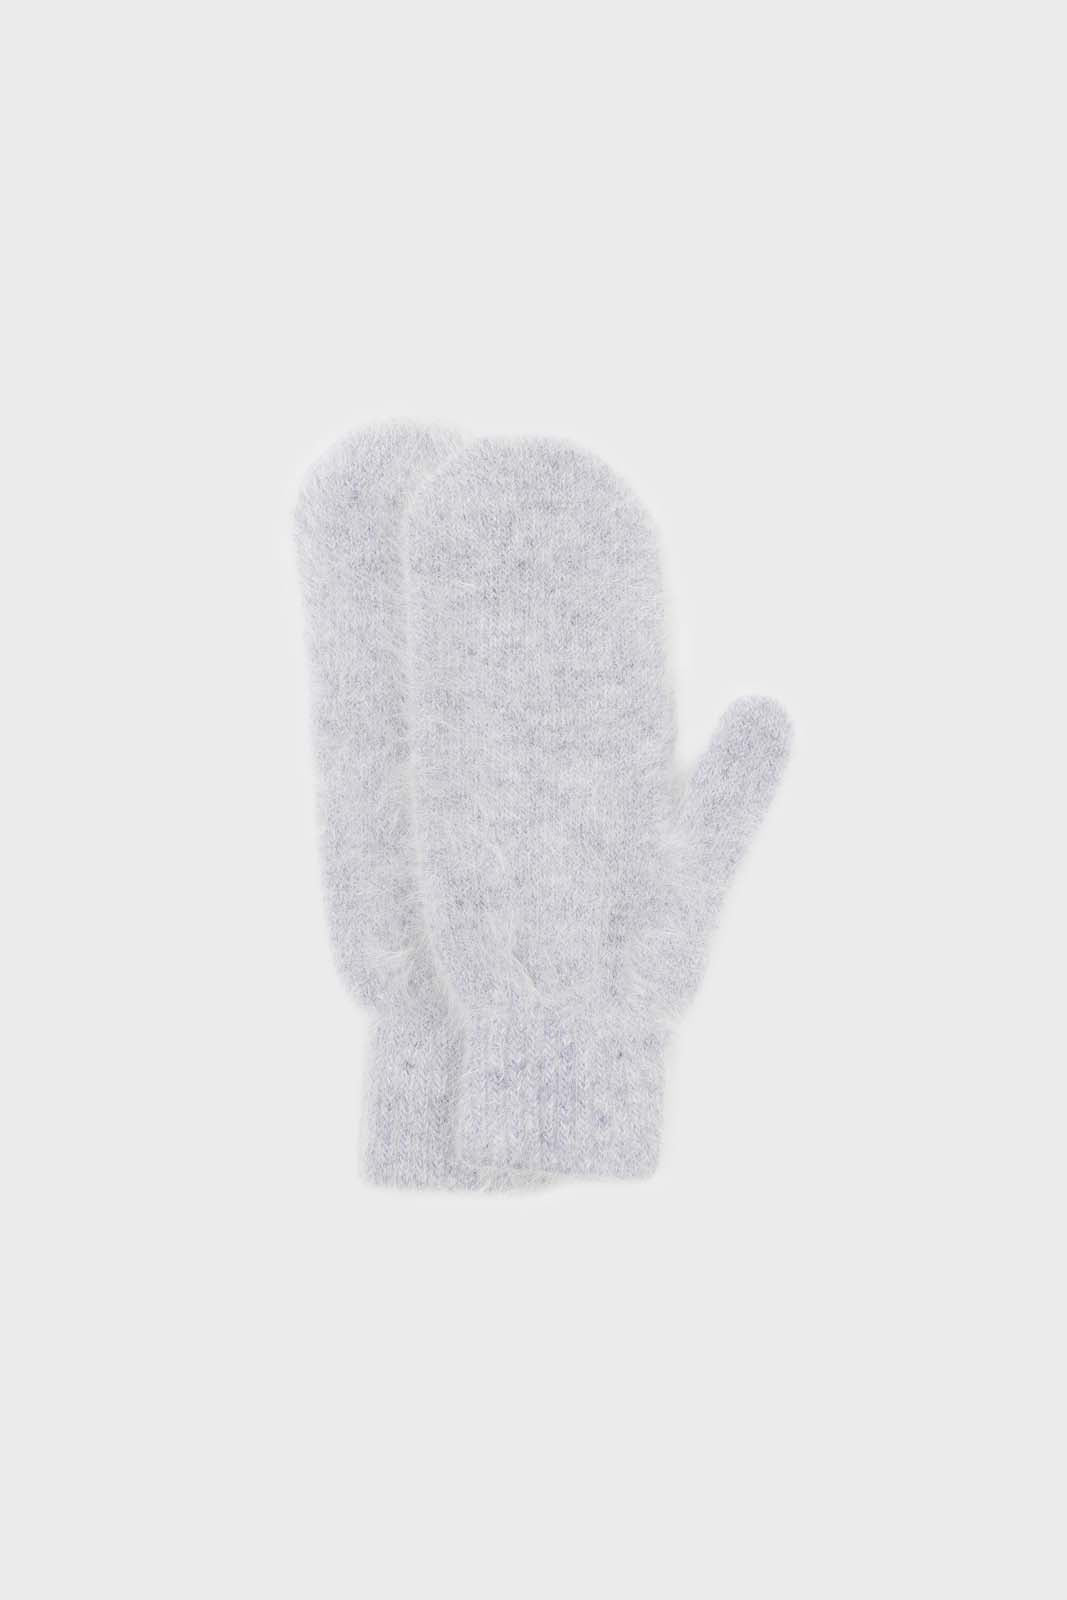 Pale grey mohair mittens